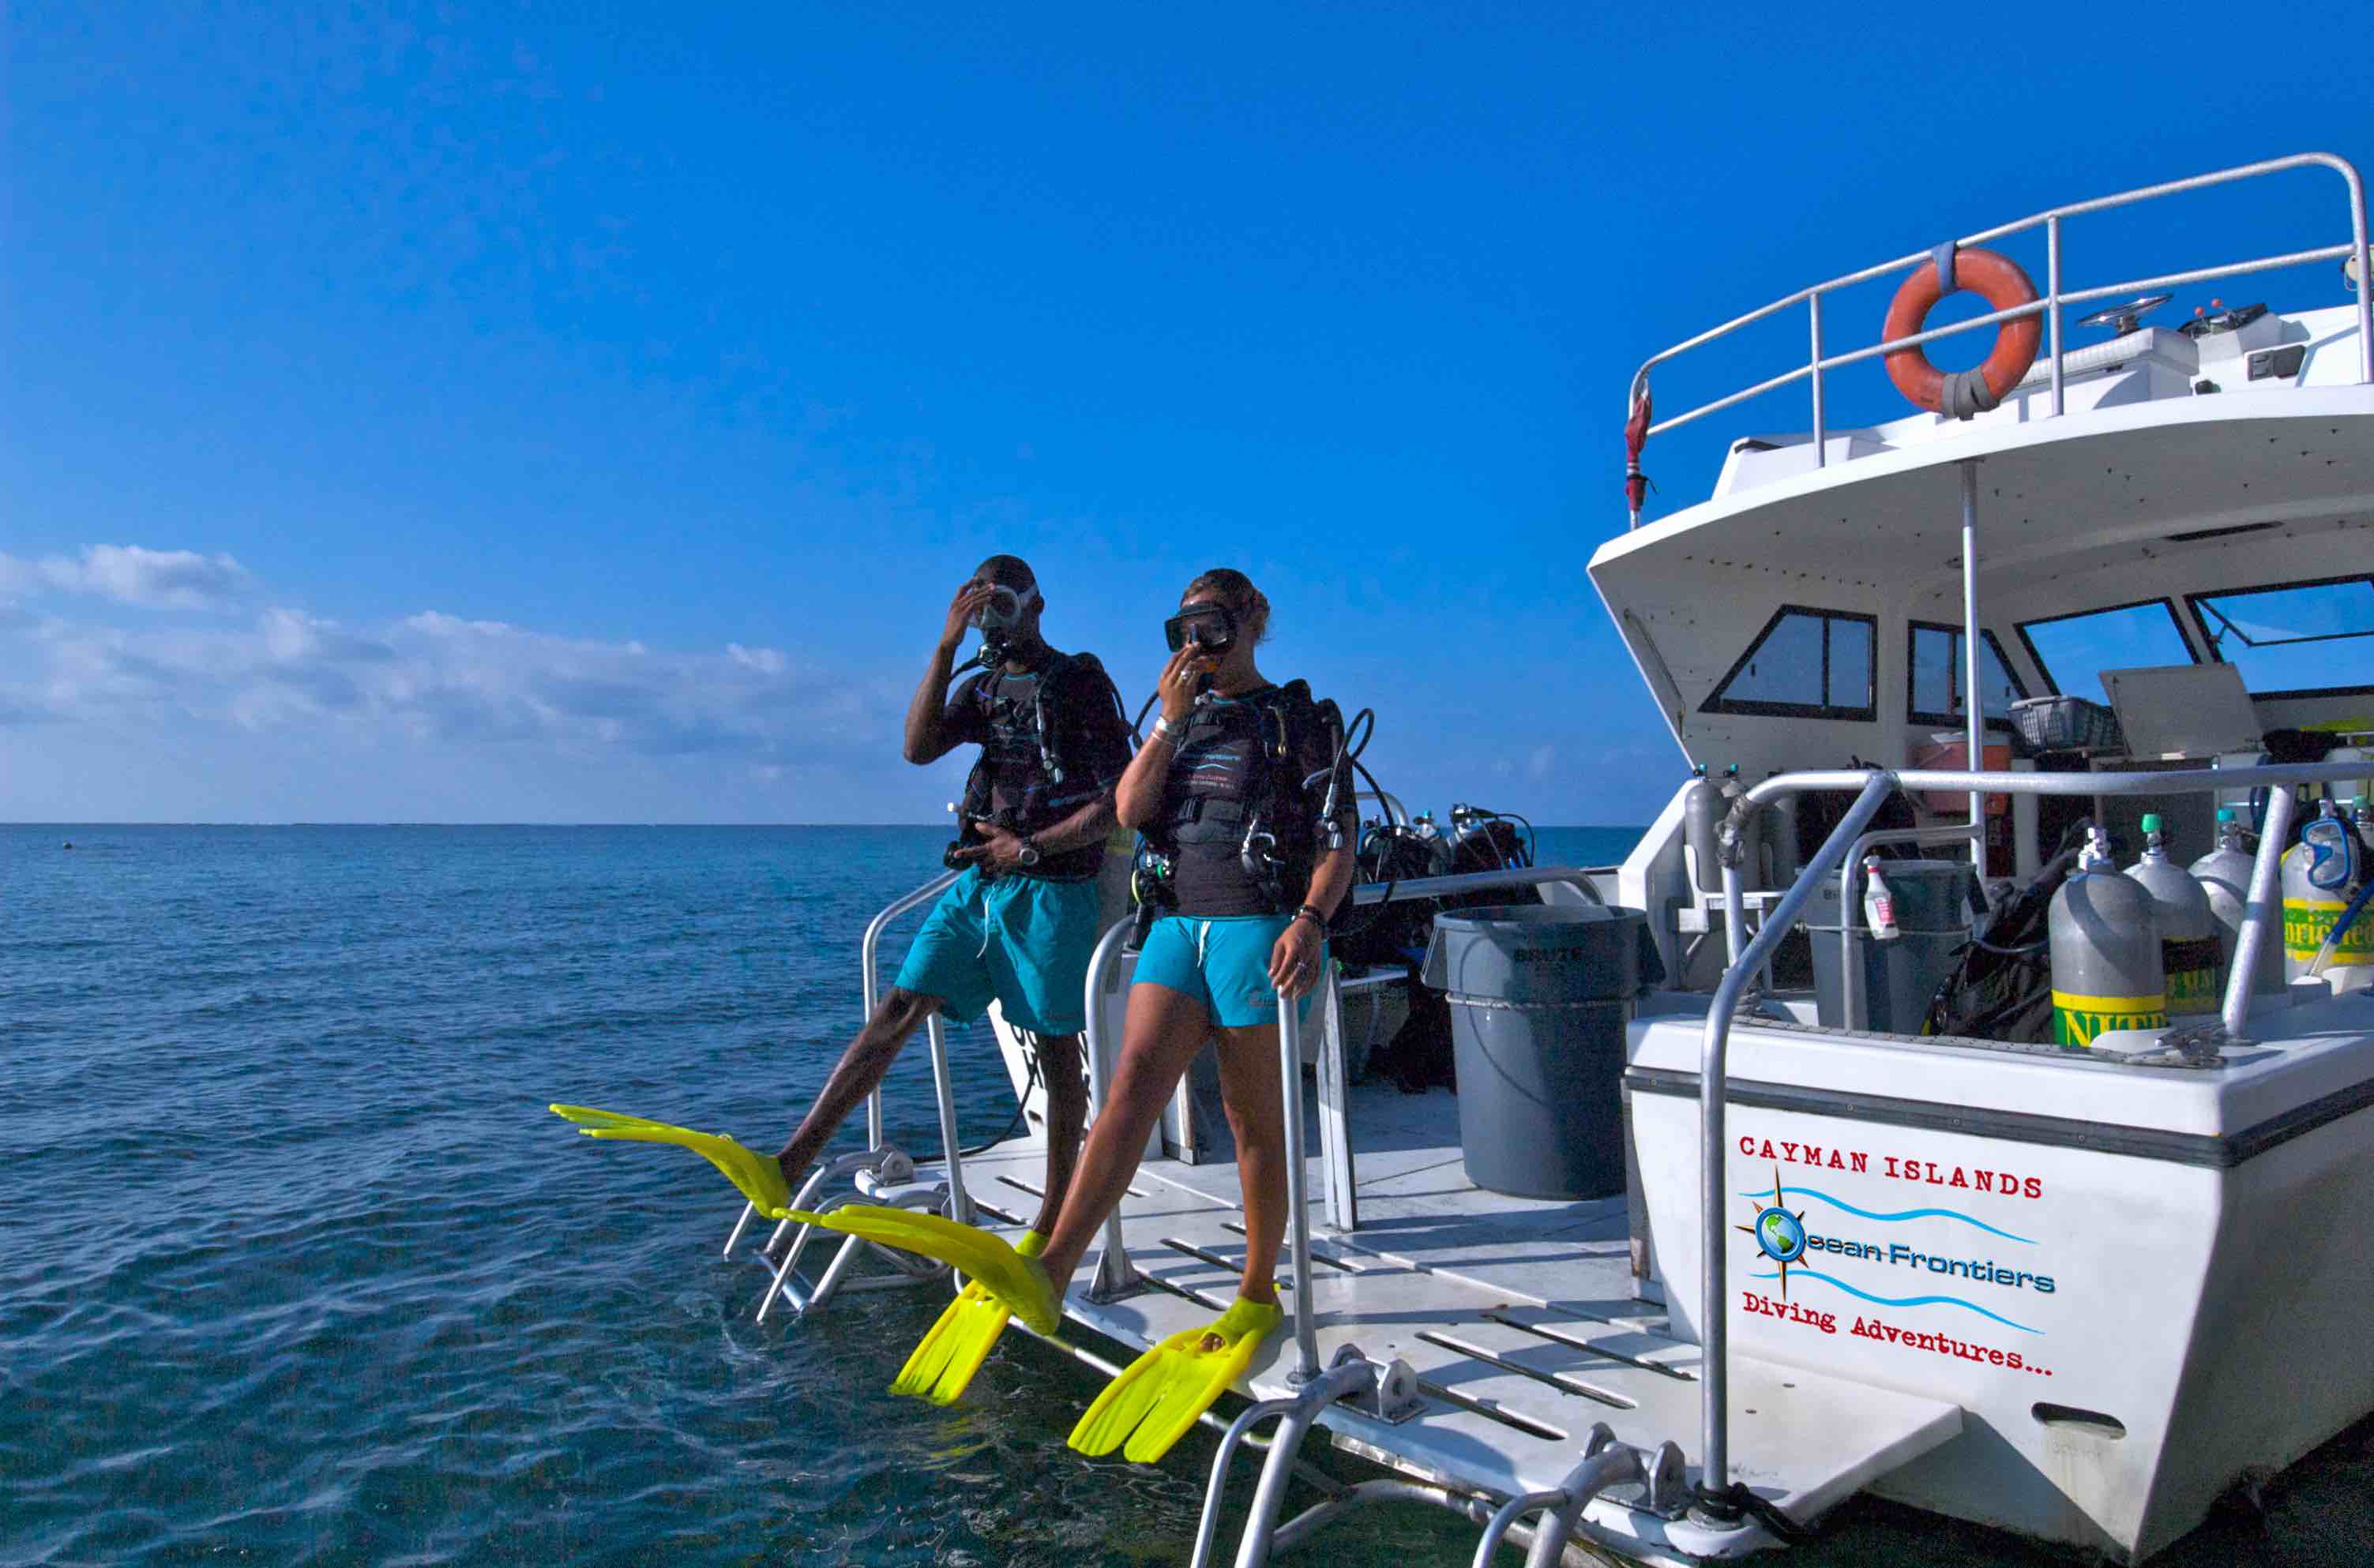 Divers getting ready to jump off a dive boat